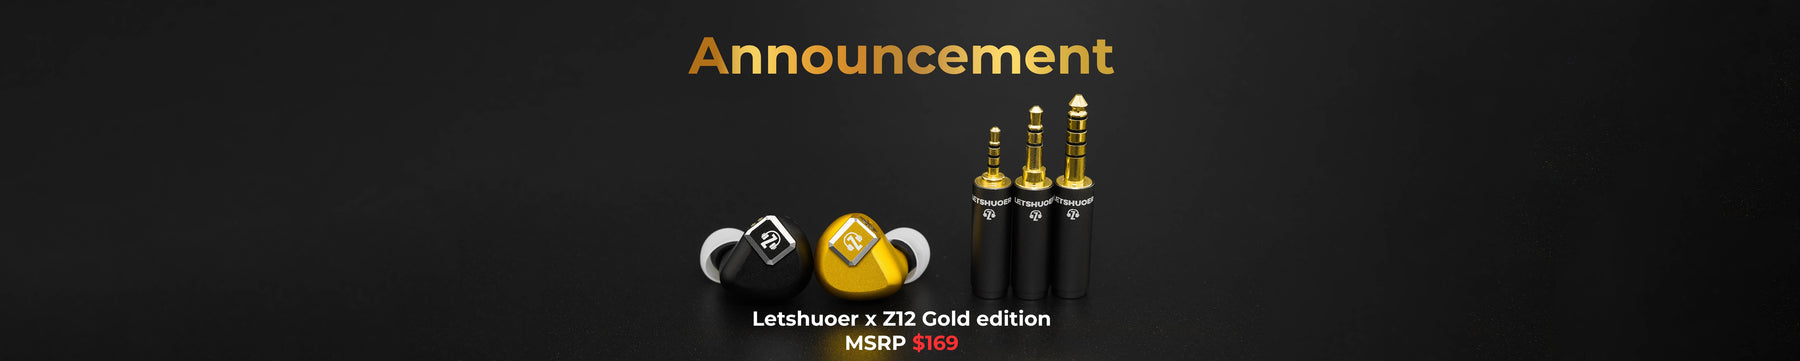 LETSHUOER X Z Reviews Gold Edition Officially Released With Upgraded Modular Cable & New Color Options